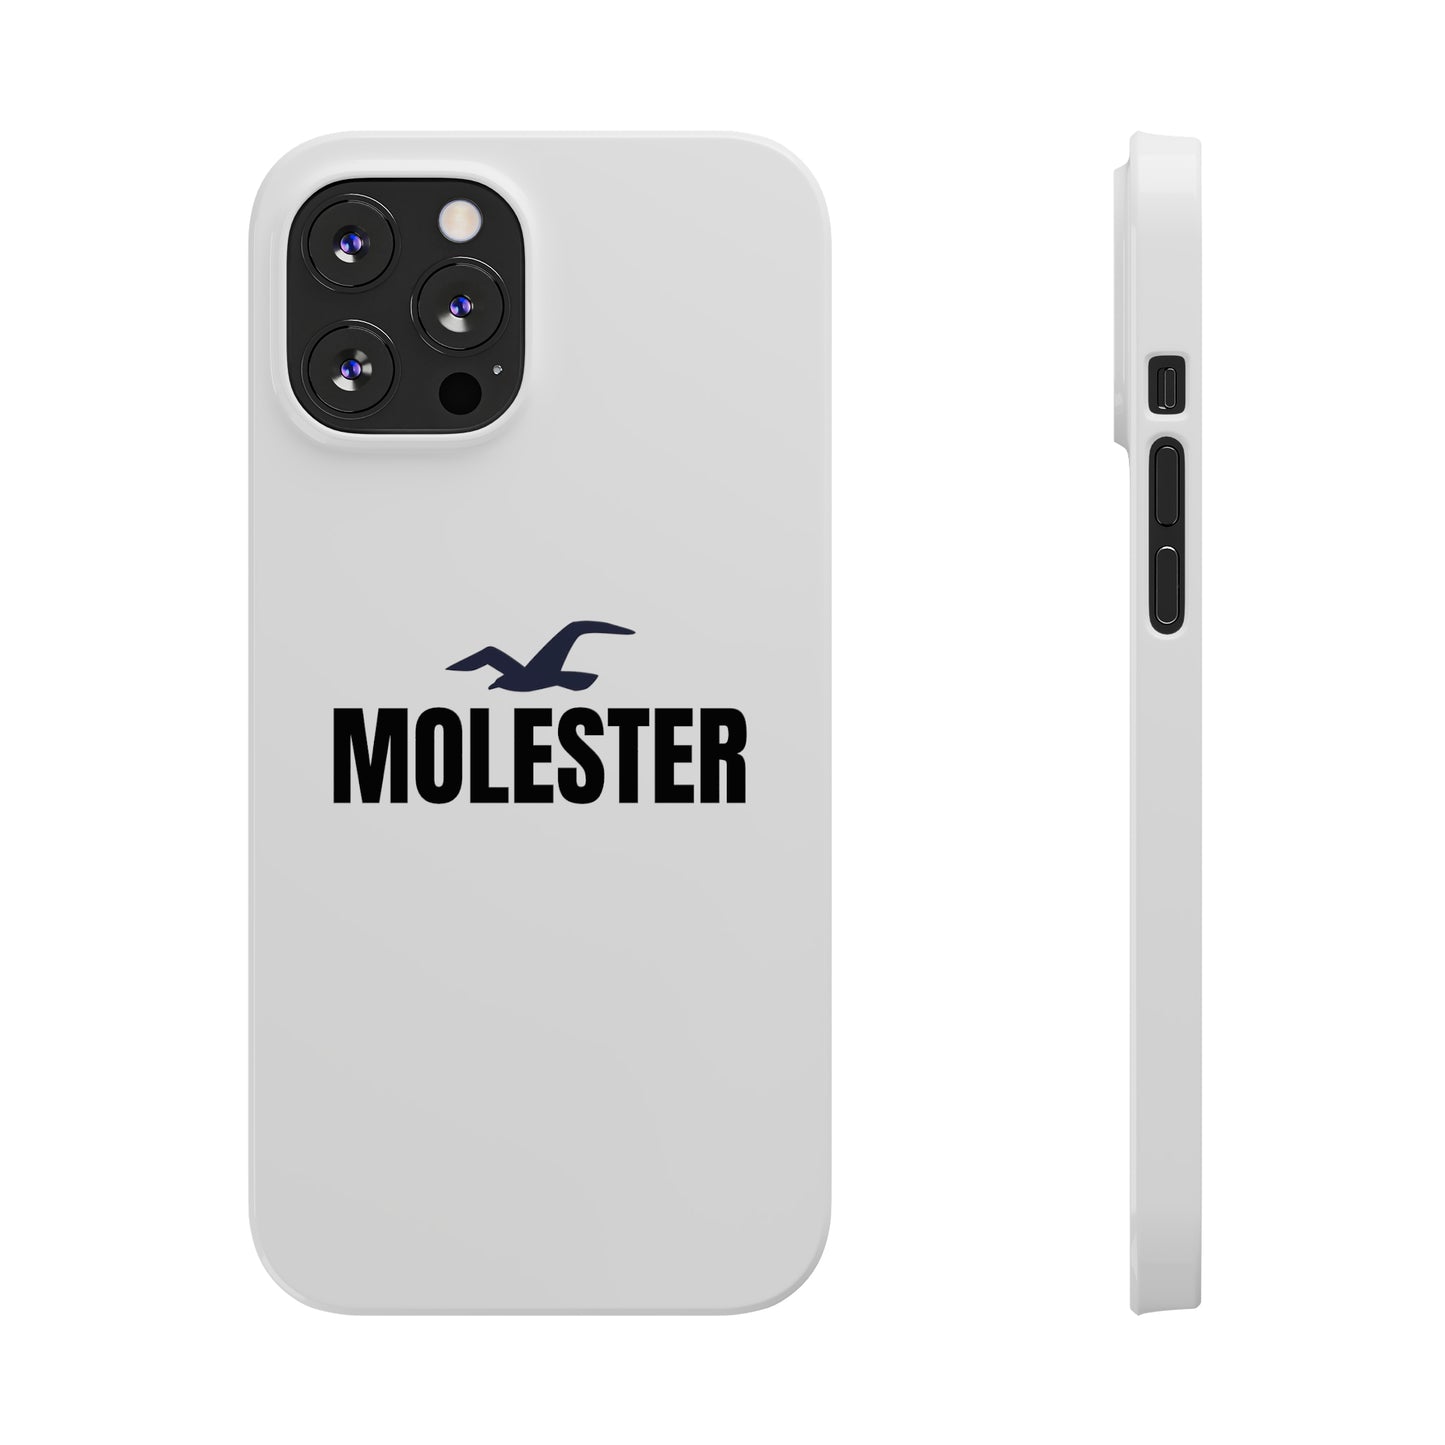 "Molester" MagStrong Phone Case iPhone 12 Pro Max